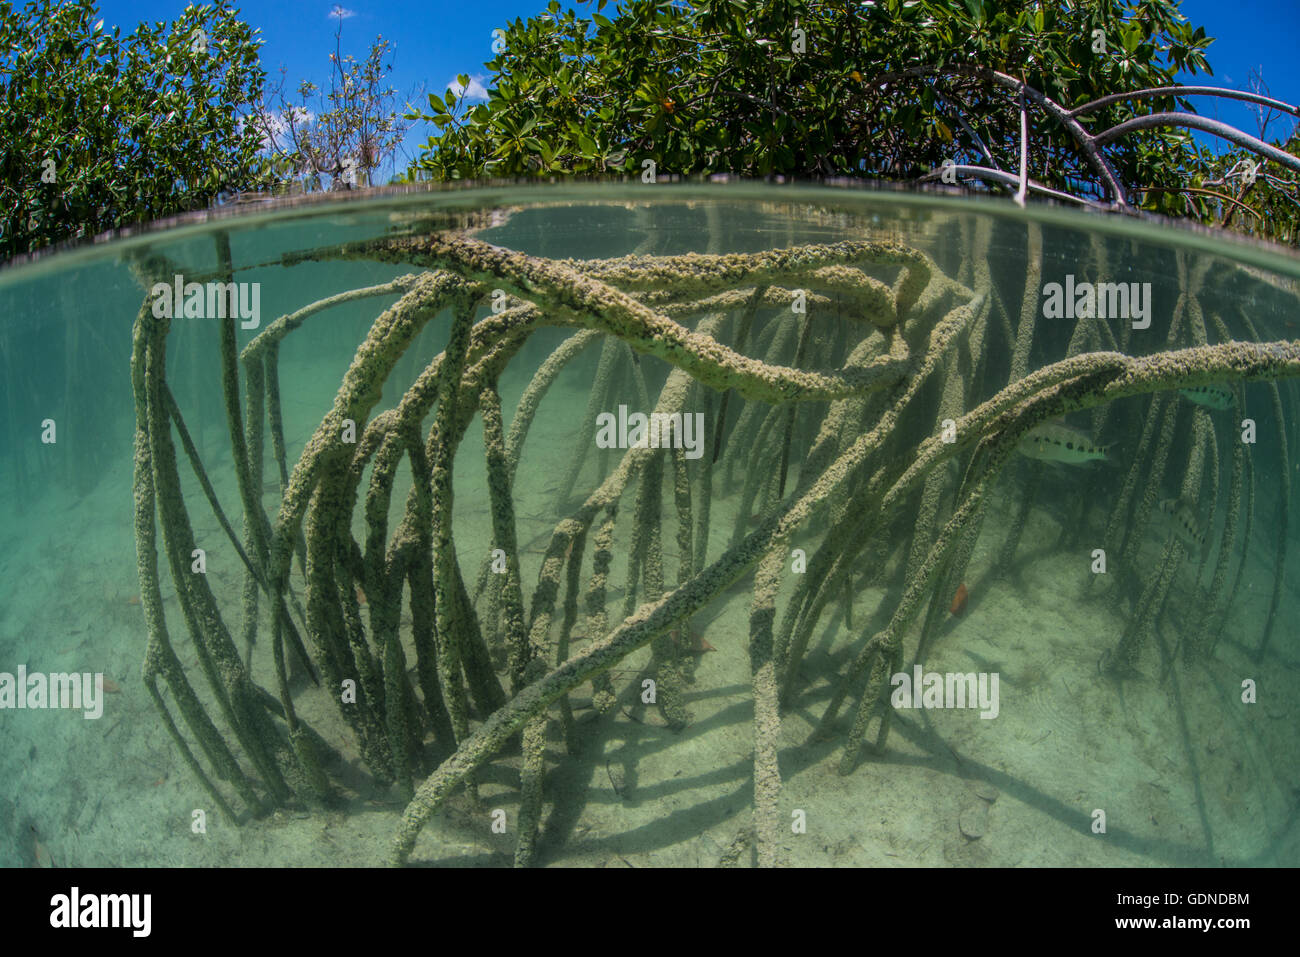 Underwater view of mangrove forest, Sian Kaan biosphere reserve, Quintana Roo, Mexico Stock Photo